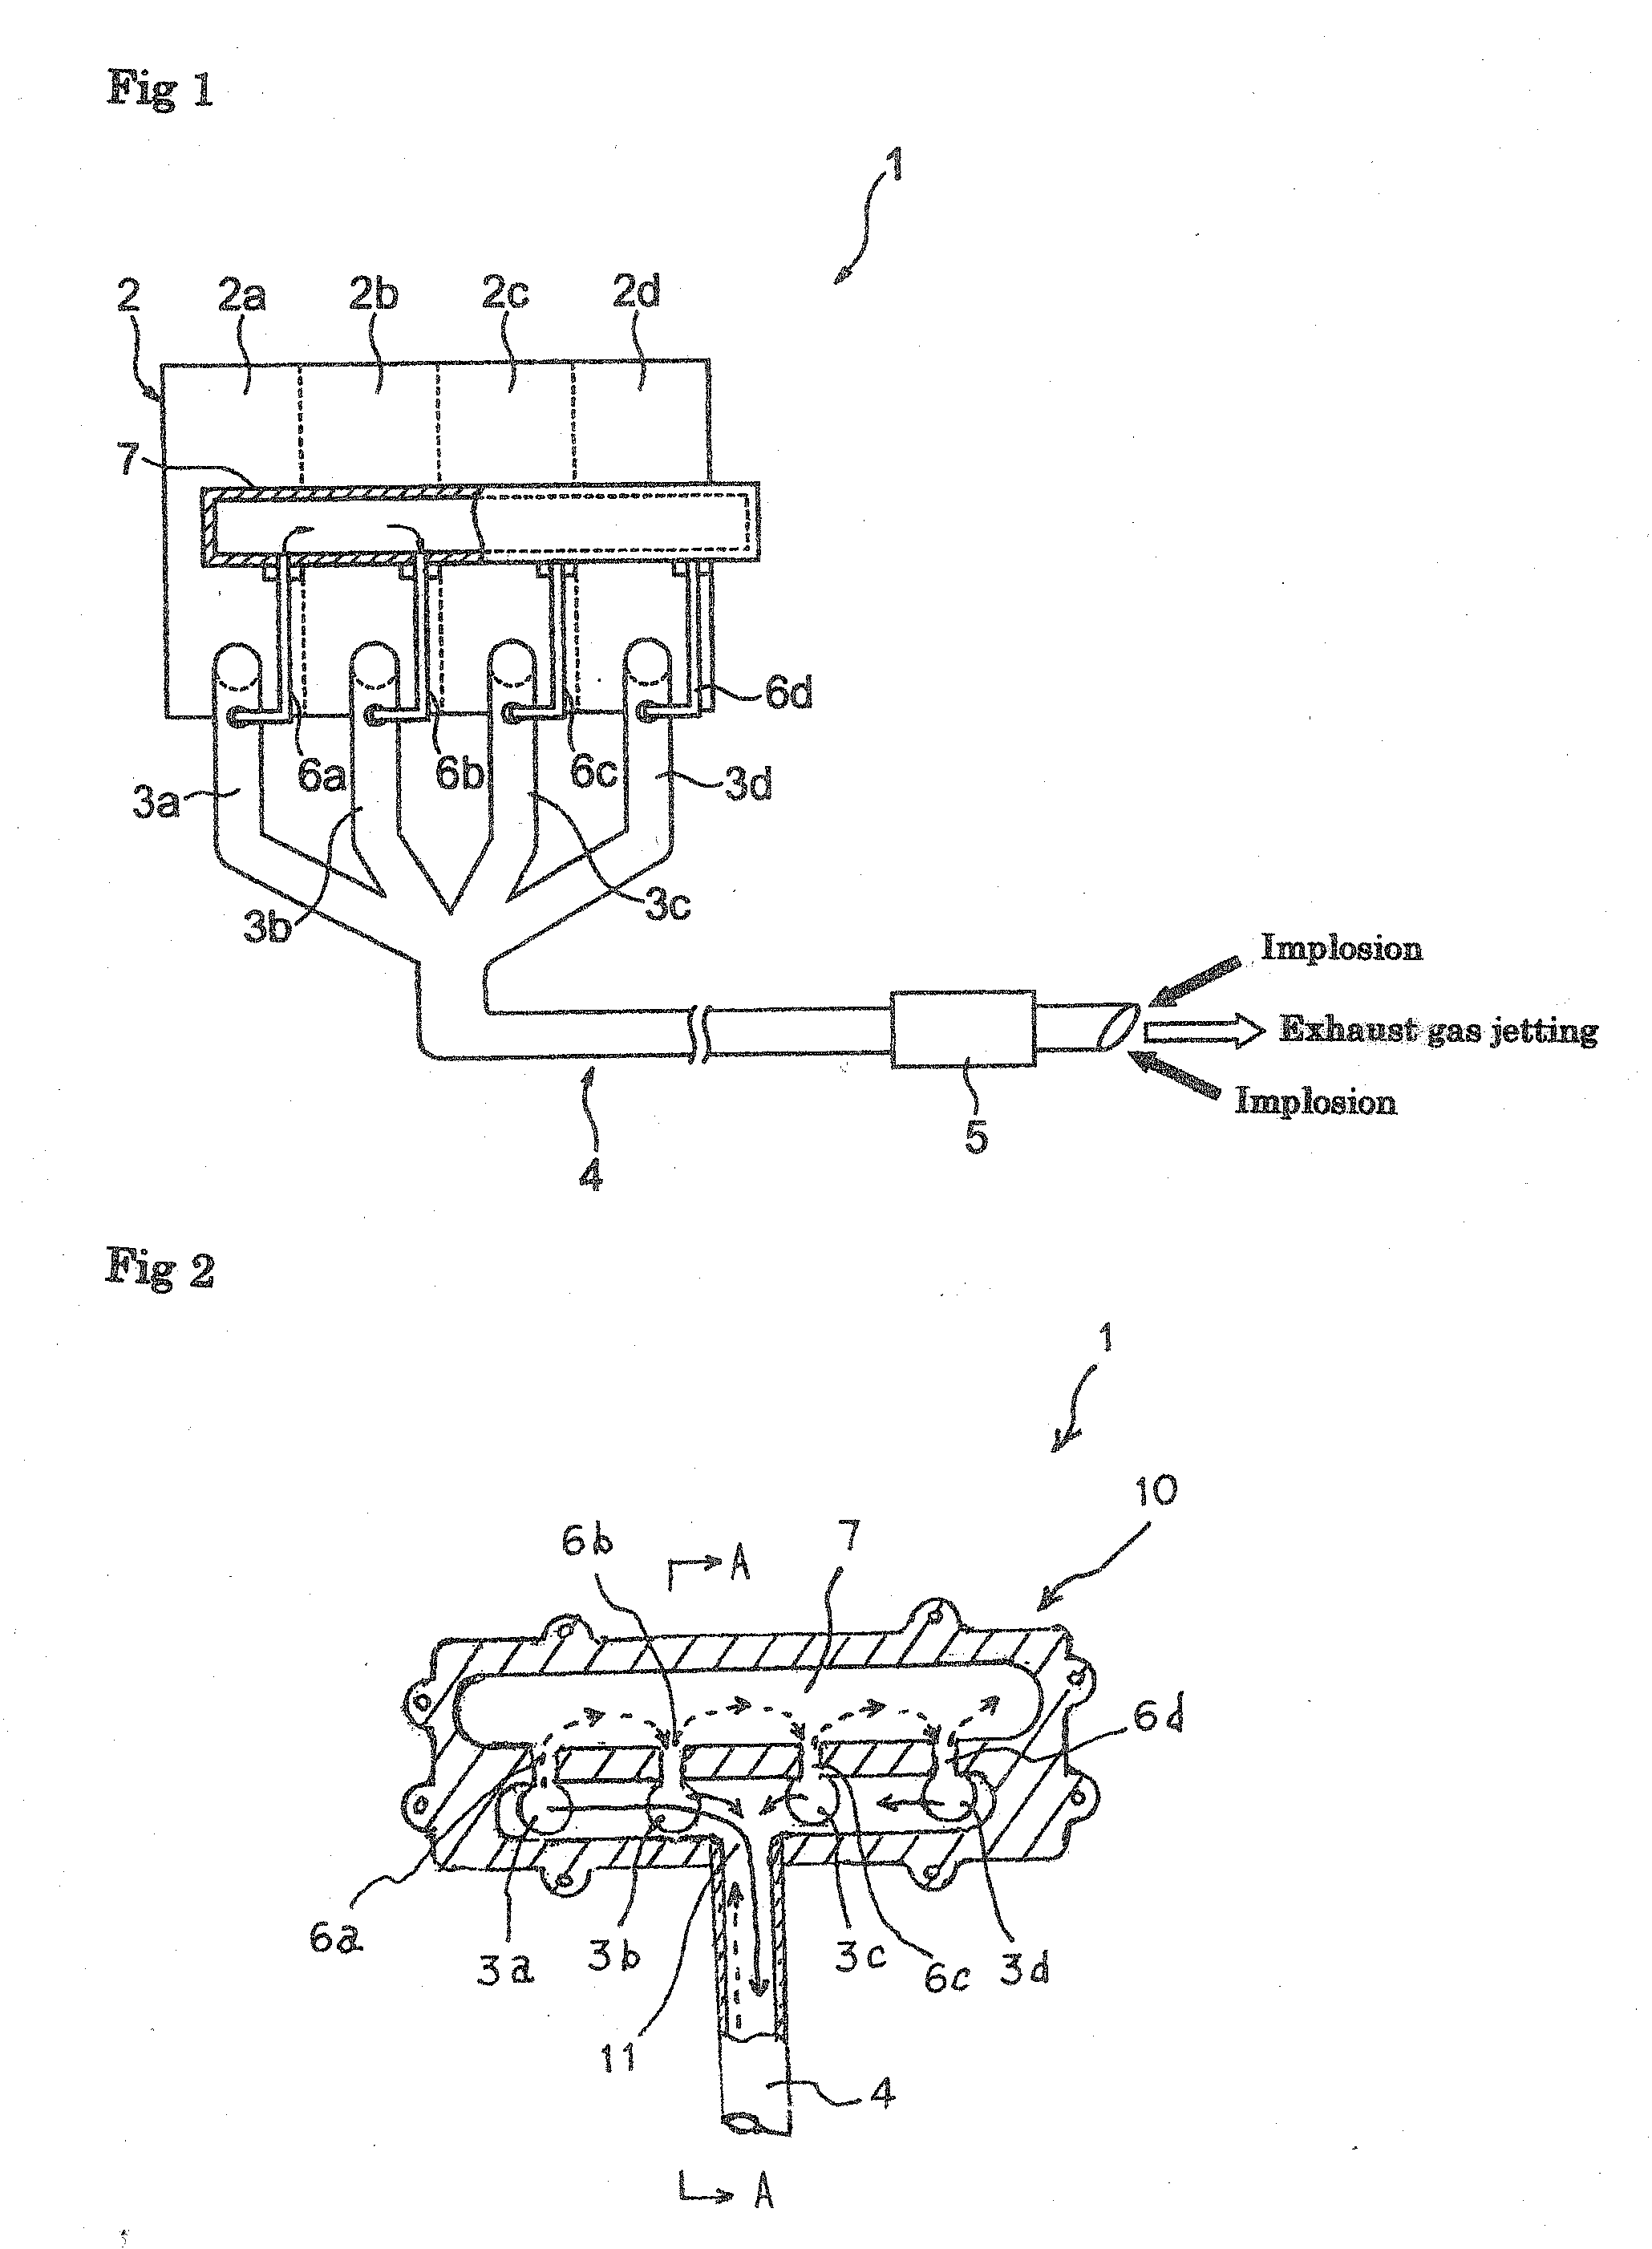 Internal combustion engine having exhaust gas bypassing control mechanism